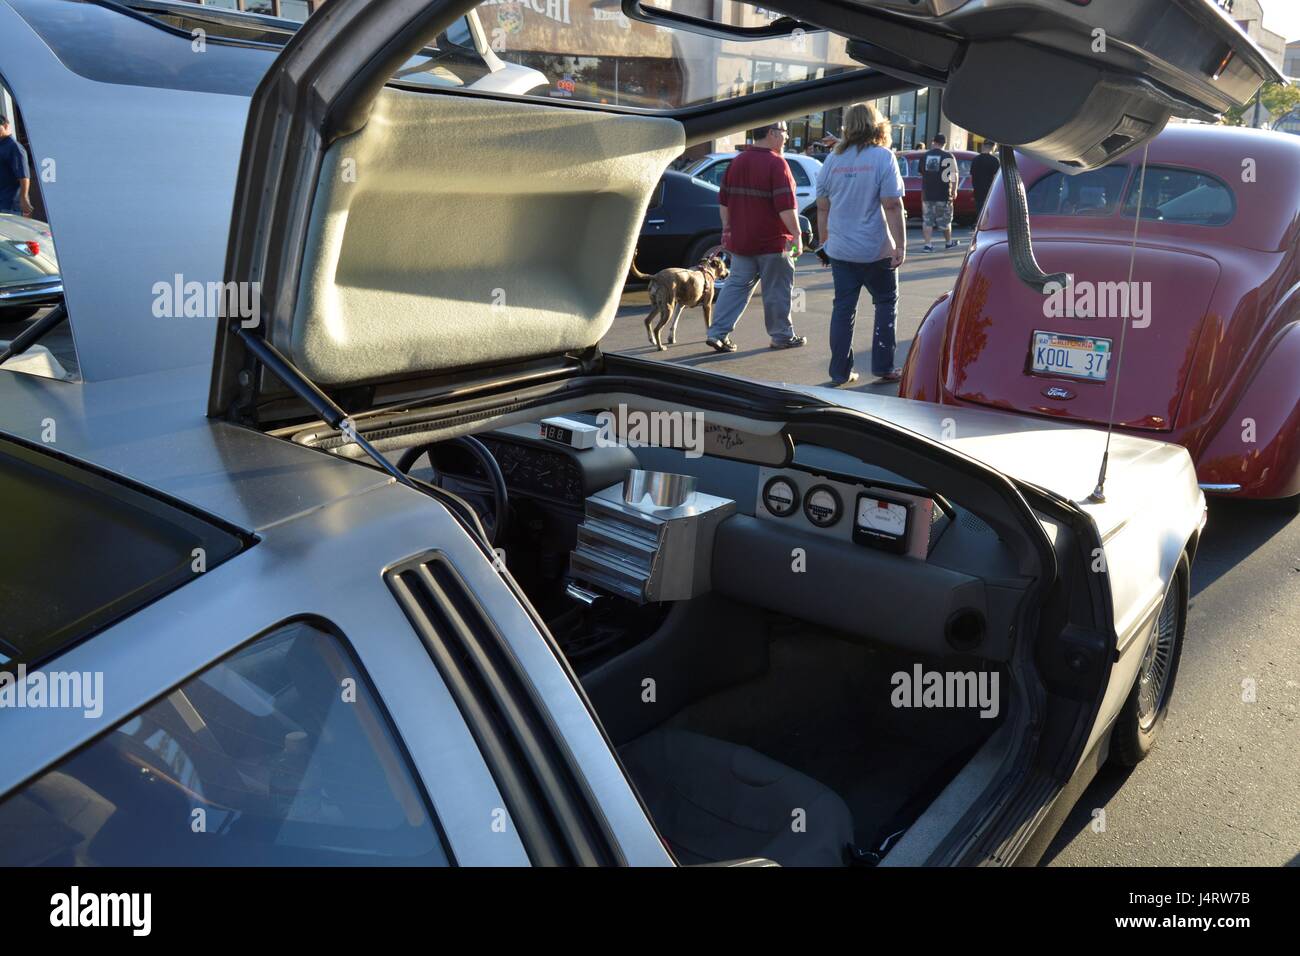 DeLorean, Back to the Future car, Delorean, gull wing car, stainless steele Stock Photo